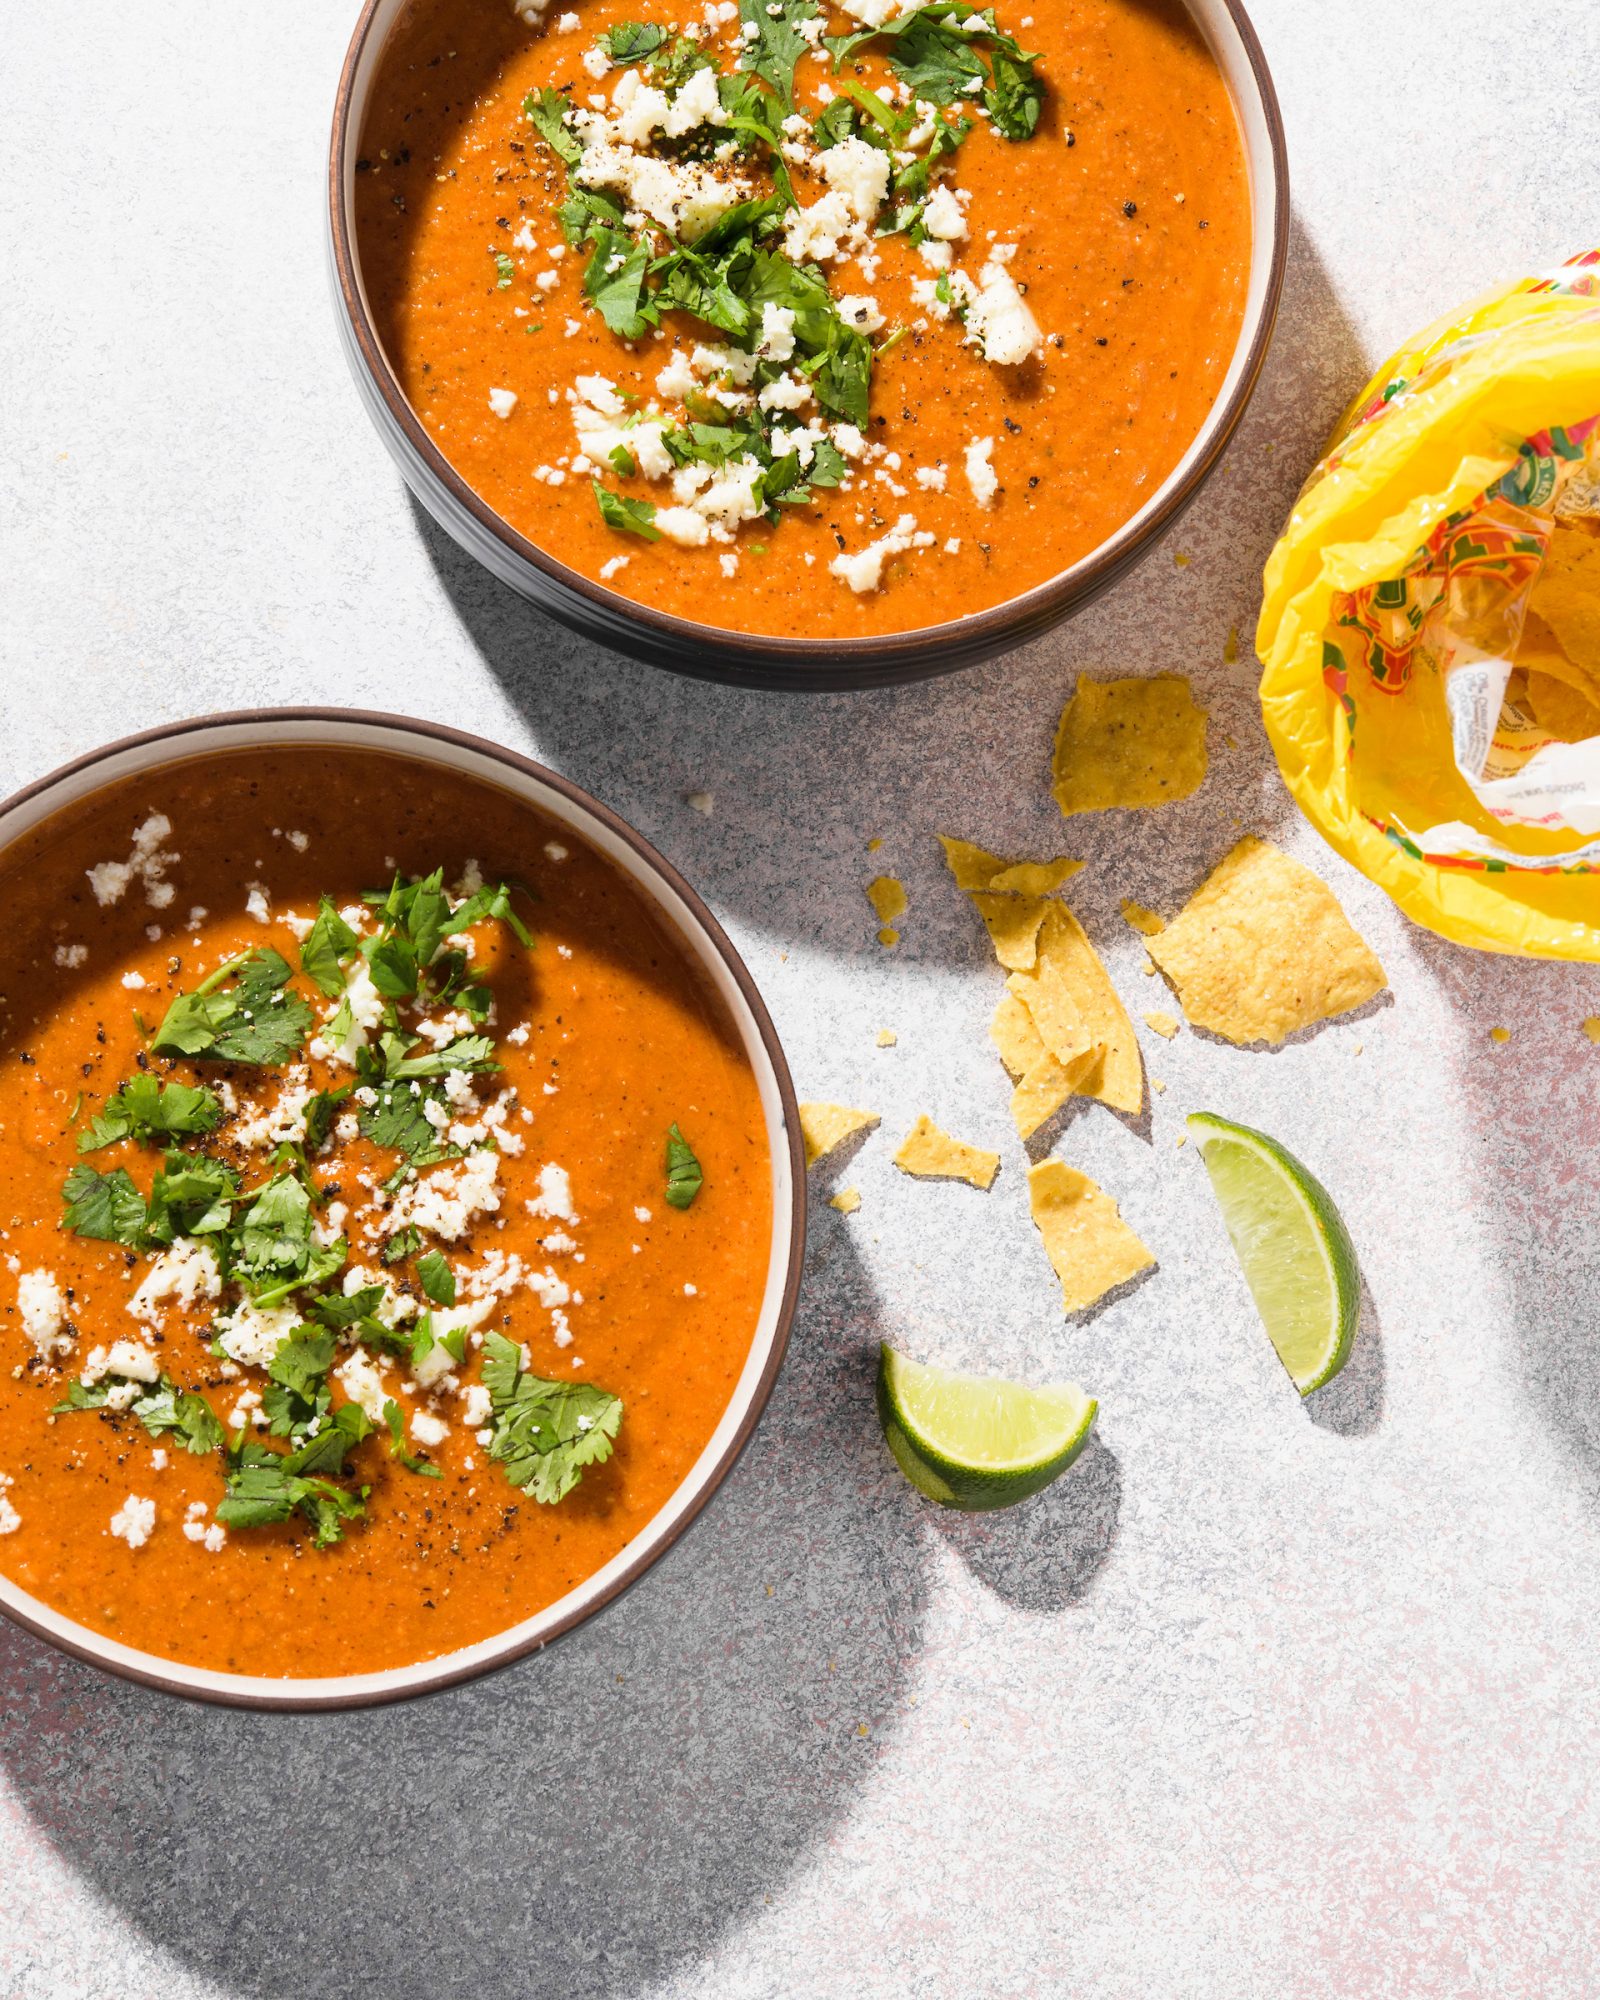 Creamy Pinto Bean Tomato Soup Cook What You Have Milk Street